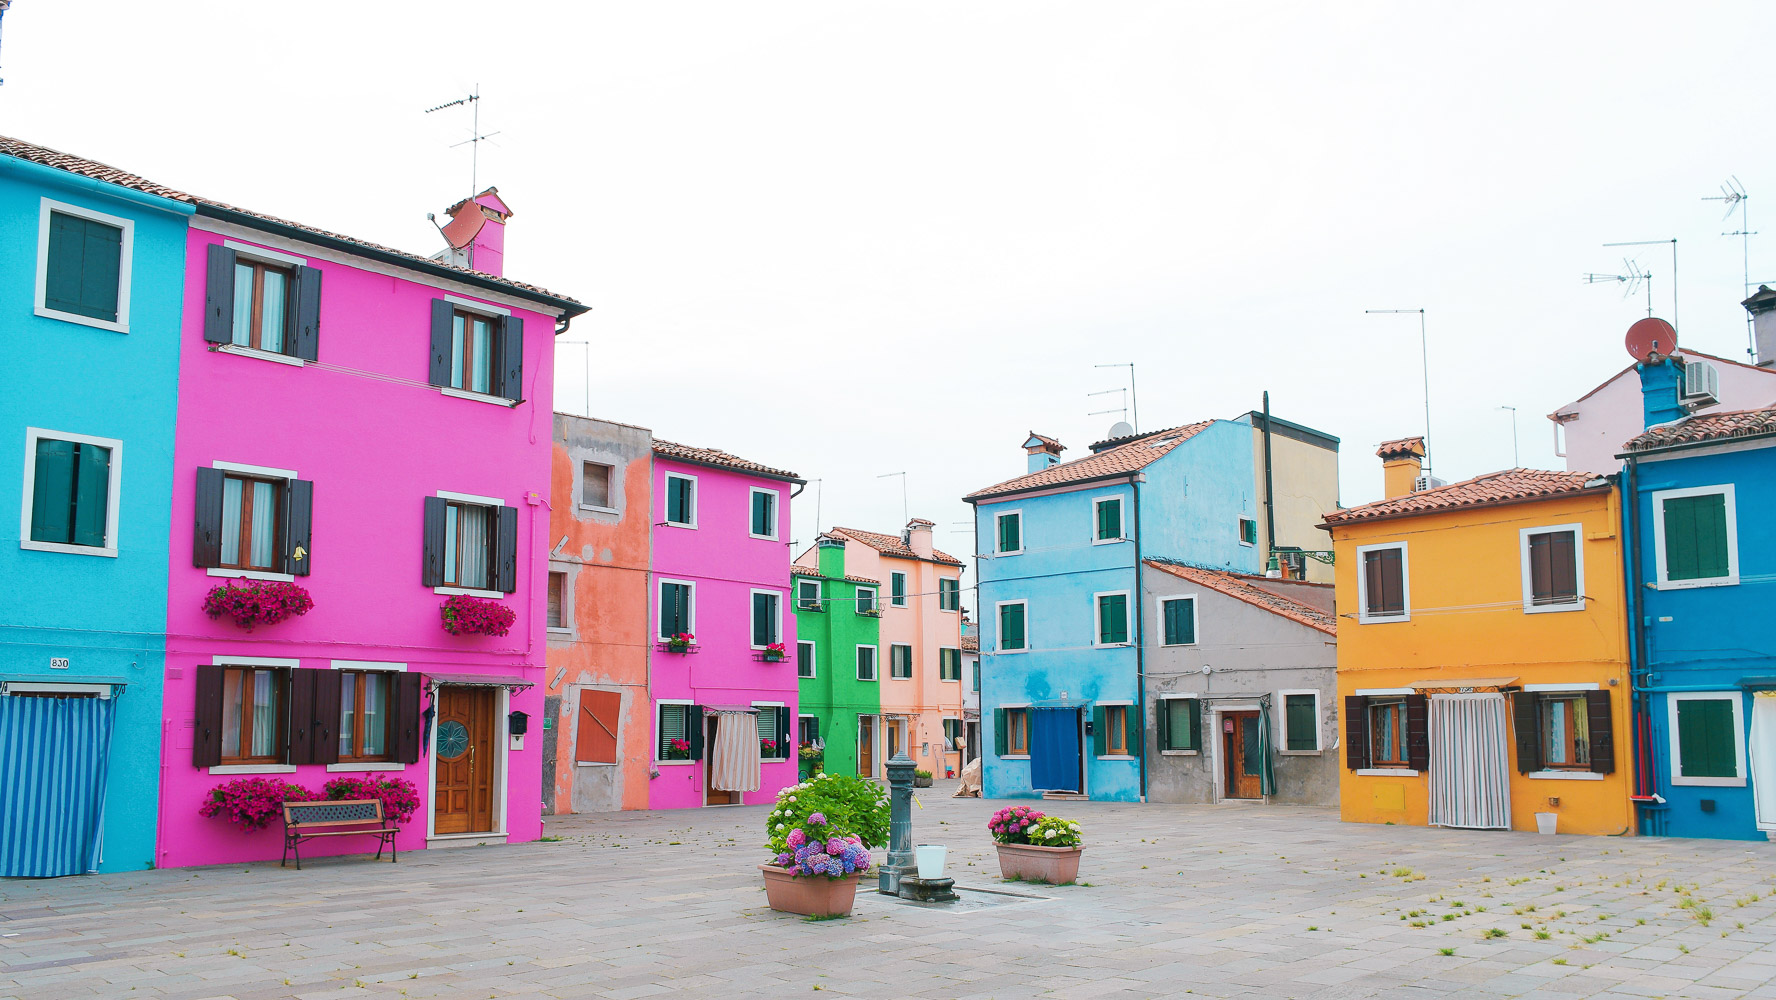 A piazza in Burano, Italy, the most colorful town in Europe